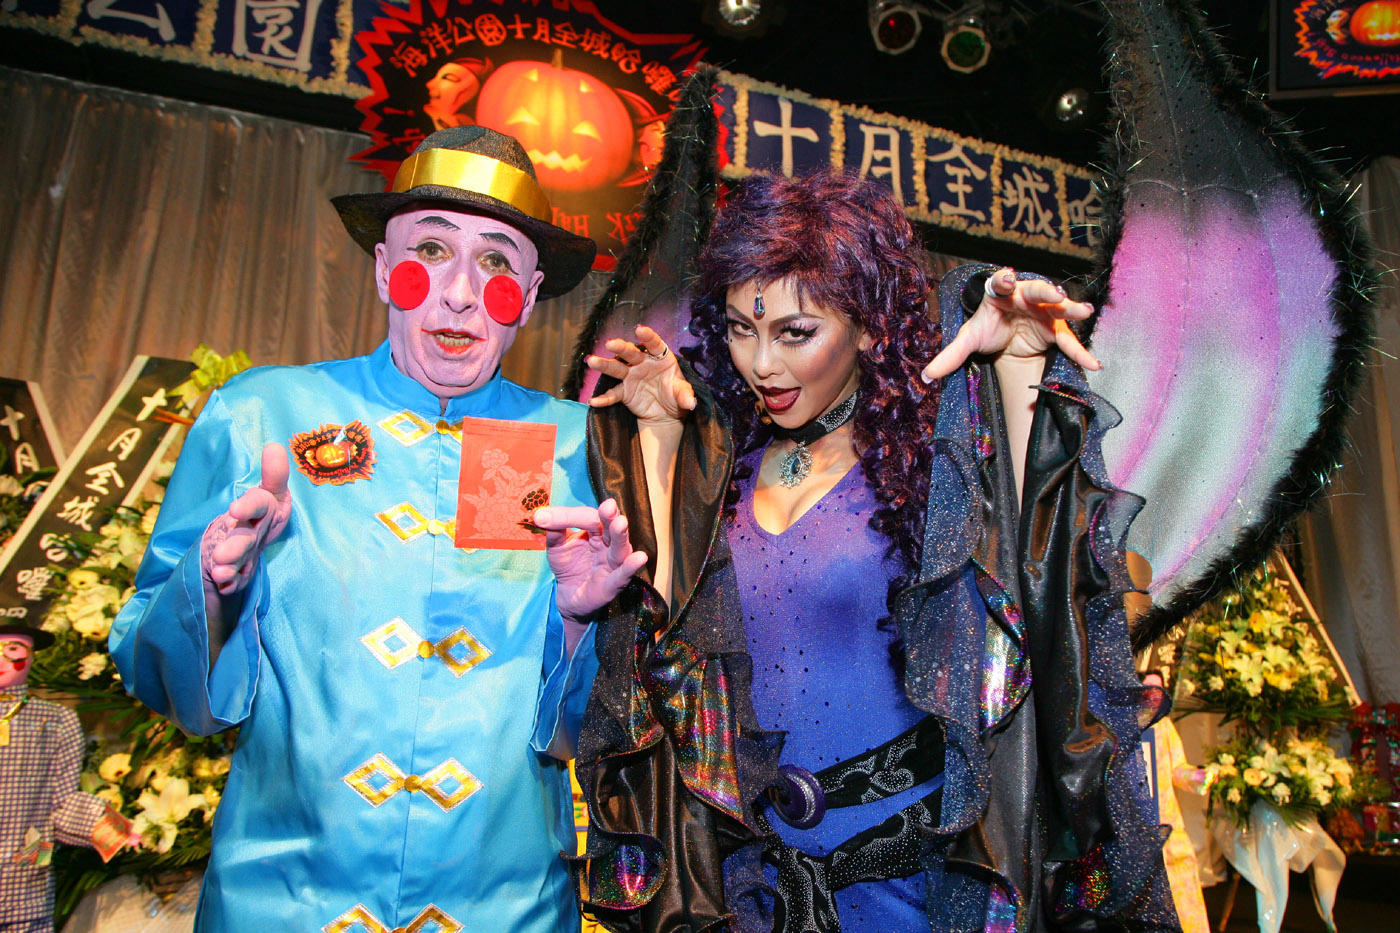 A man of many themes: Allan Zeman has gone to great lengths to garner publicity for Ocean Park over the years. Photo: SCMP Pictures